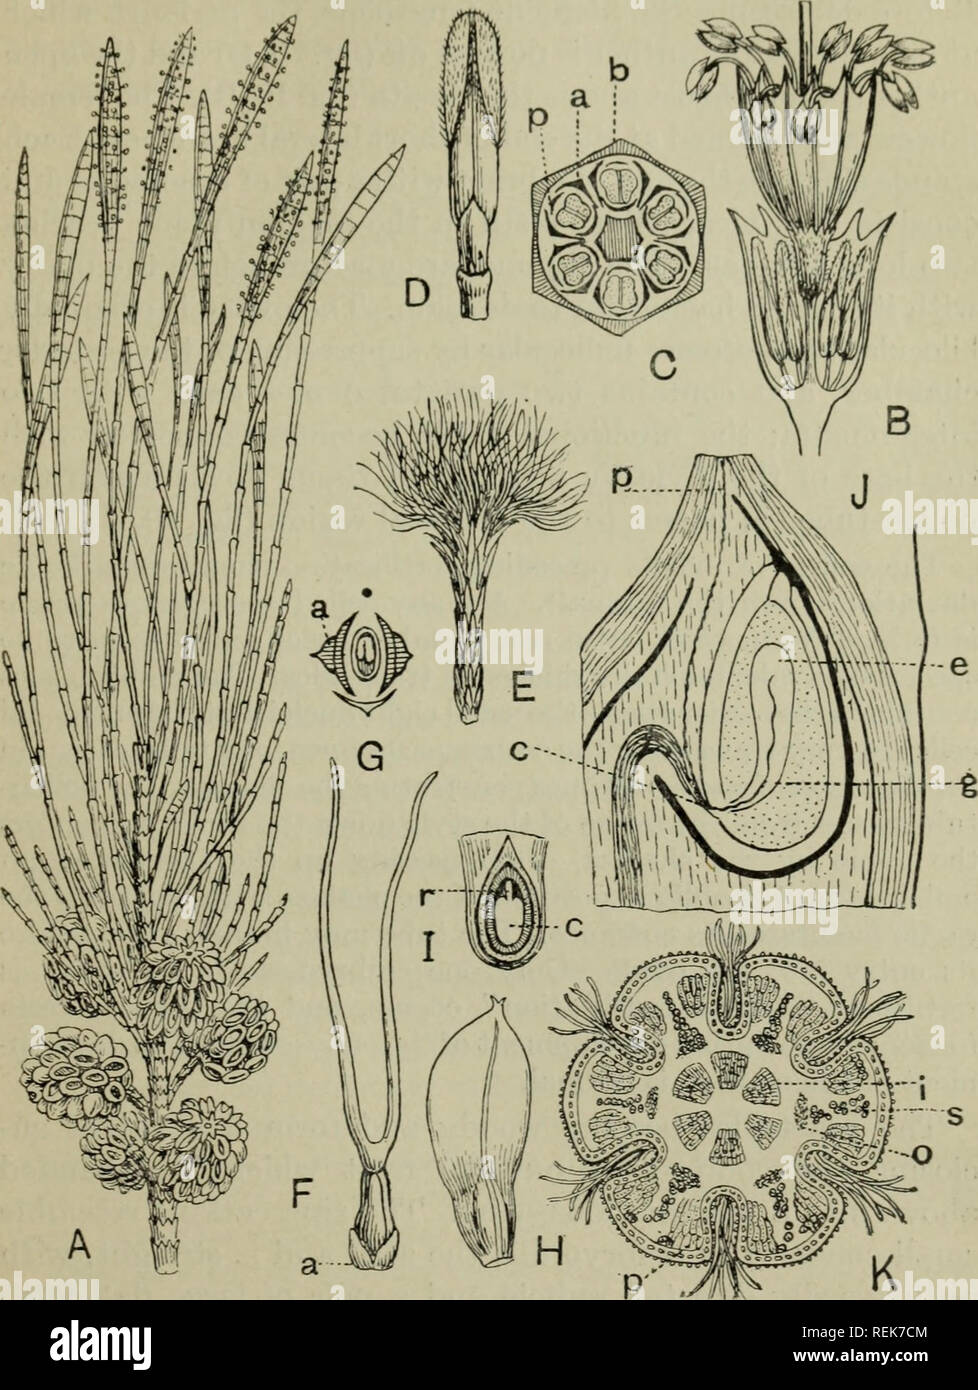 . The classification of flowering plants. Plants. CASUARINACEAE 37. Fig. 10. Casuarina equisetifolia. A. Shoot ^vith. male inflorescences and fruits. B. Portion of male inflorescence, two whorls; the lower sheath is cut open shewing young flowers. C. Diagram of a whorl of male flowers; b, bract; a, bracteole; p, perianth. D. Male flower before elongation of the filament; the perianth-leaves are being carried up on the anther. E. Female in- florescence, with long, protruding stigmas. F. Female flower; a, bracteole. G. Diagram of same. H. Fruit. I. Lower portion of same with longitudinal section Stock Photo